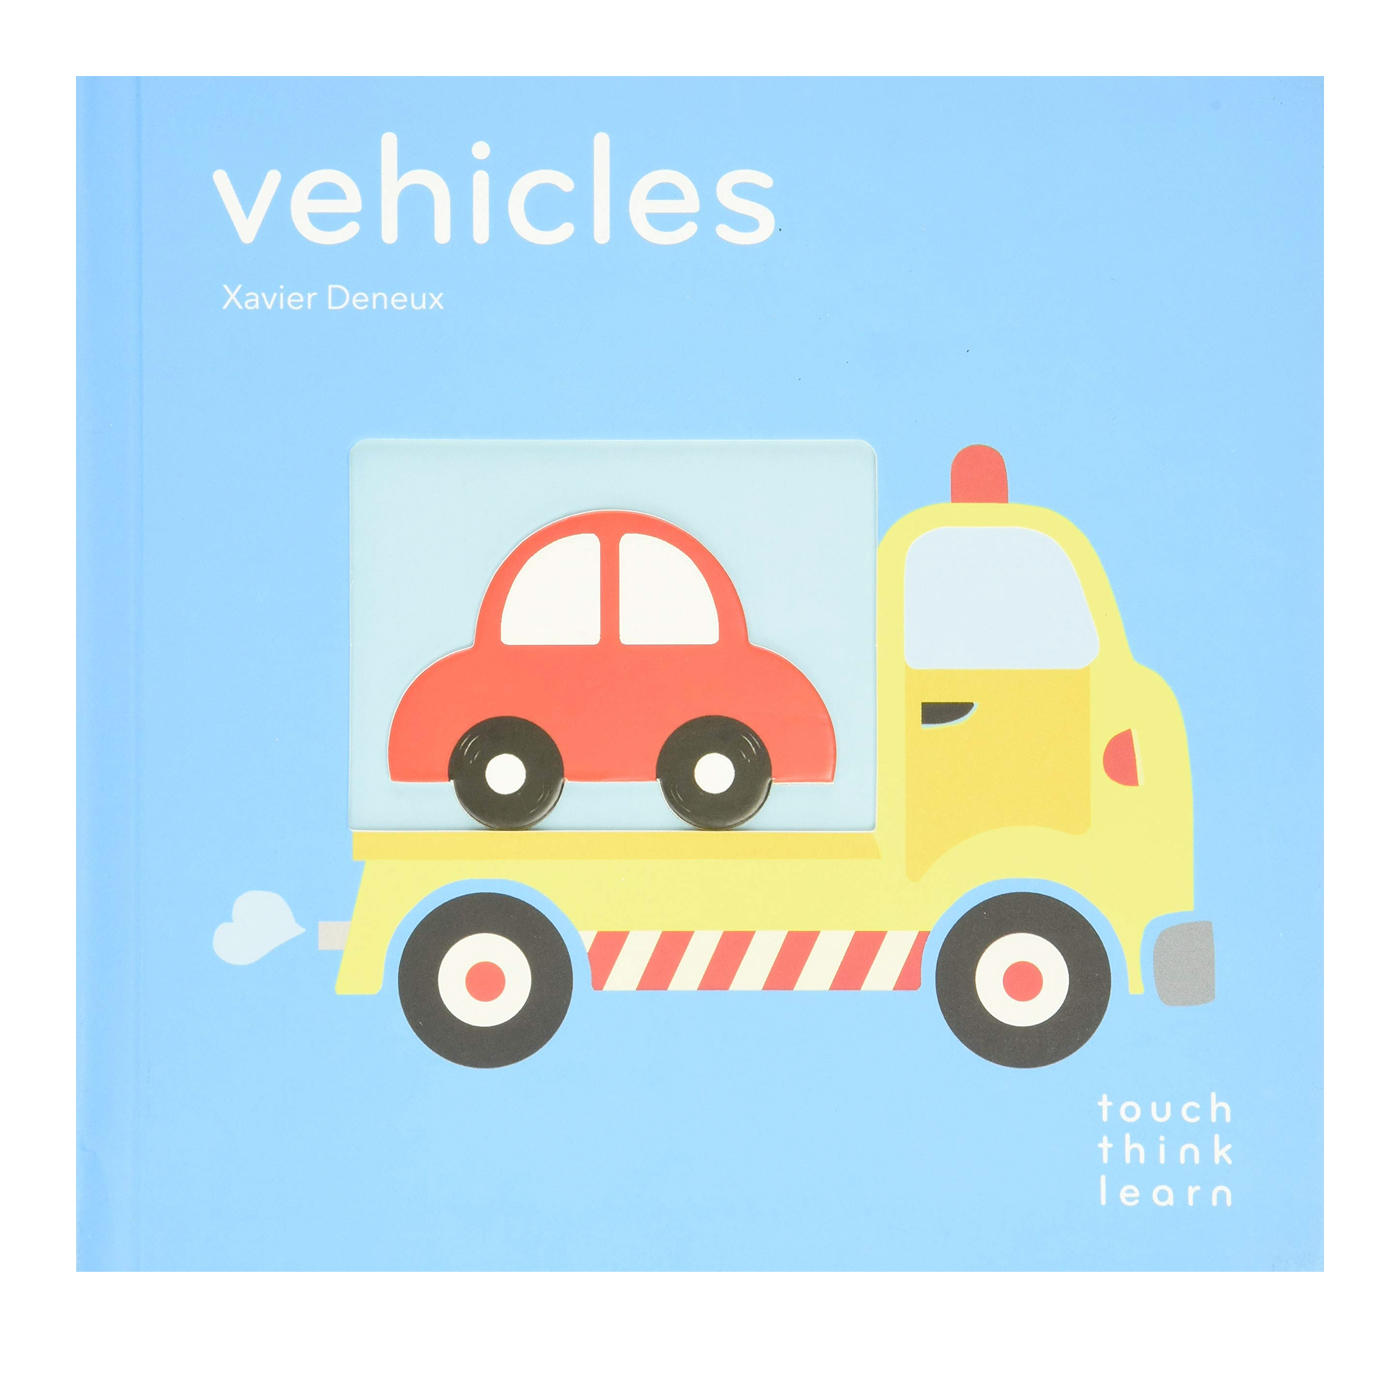  TouchThinkLearn: Vehicles